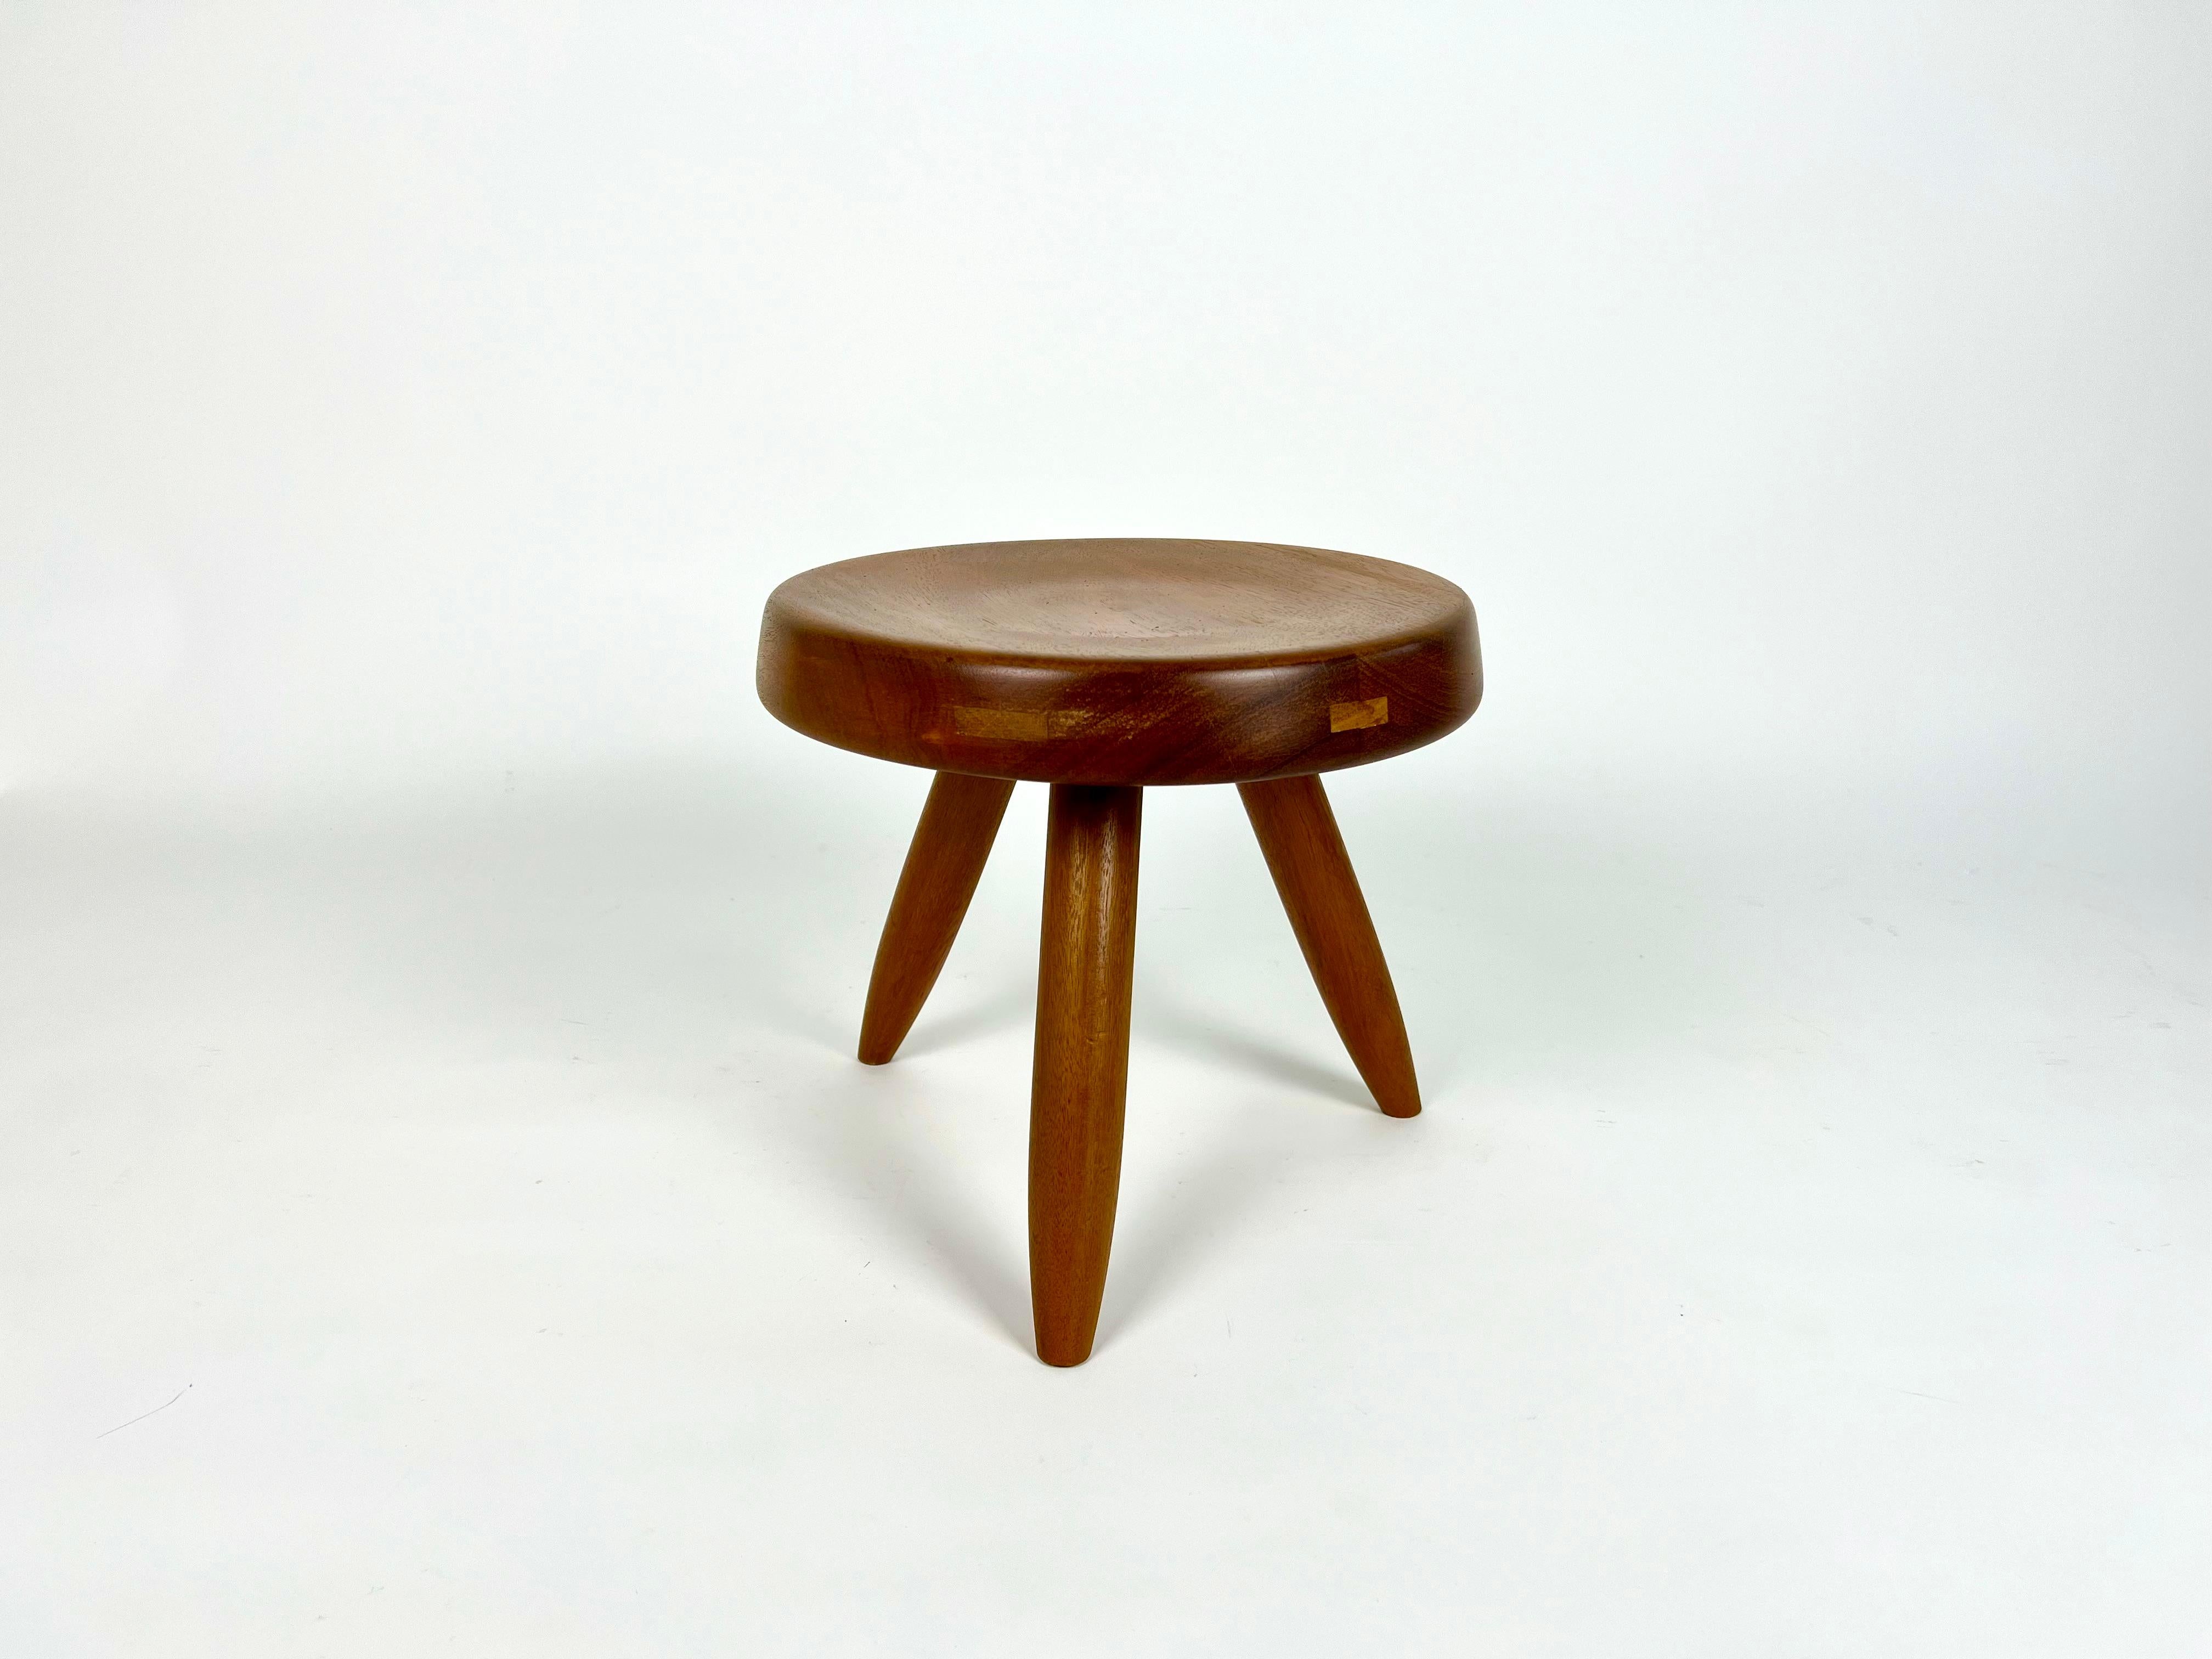 Charlotte Perriand 'Berger' low tripod stool in mahogany.

Sourced from a chalet estate sale in Meribel, Haute Savoie, France.

Well looked after with minor signs of use.
